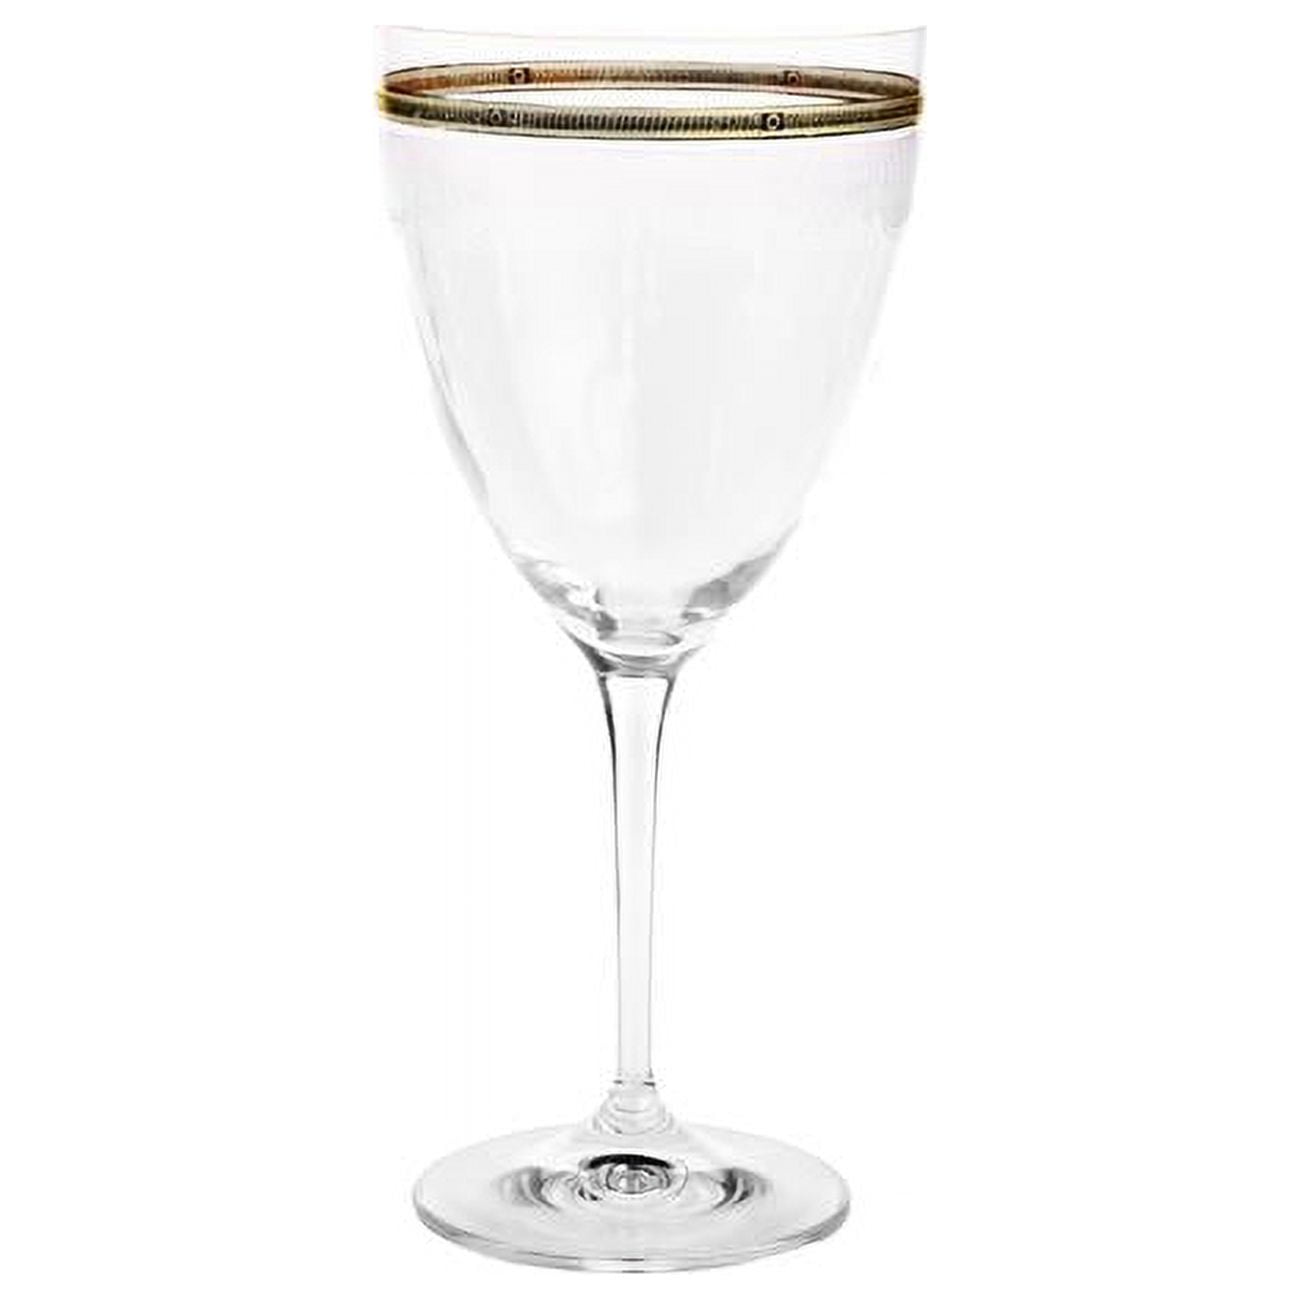 Classic Touch Cwg2023 Water Glasses With Gold Rim & Design - Set Of 6